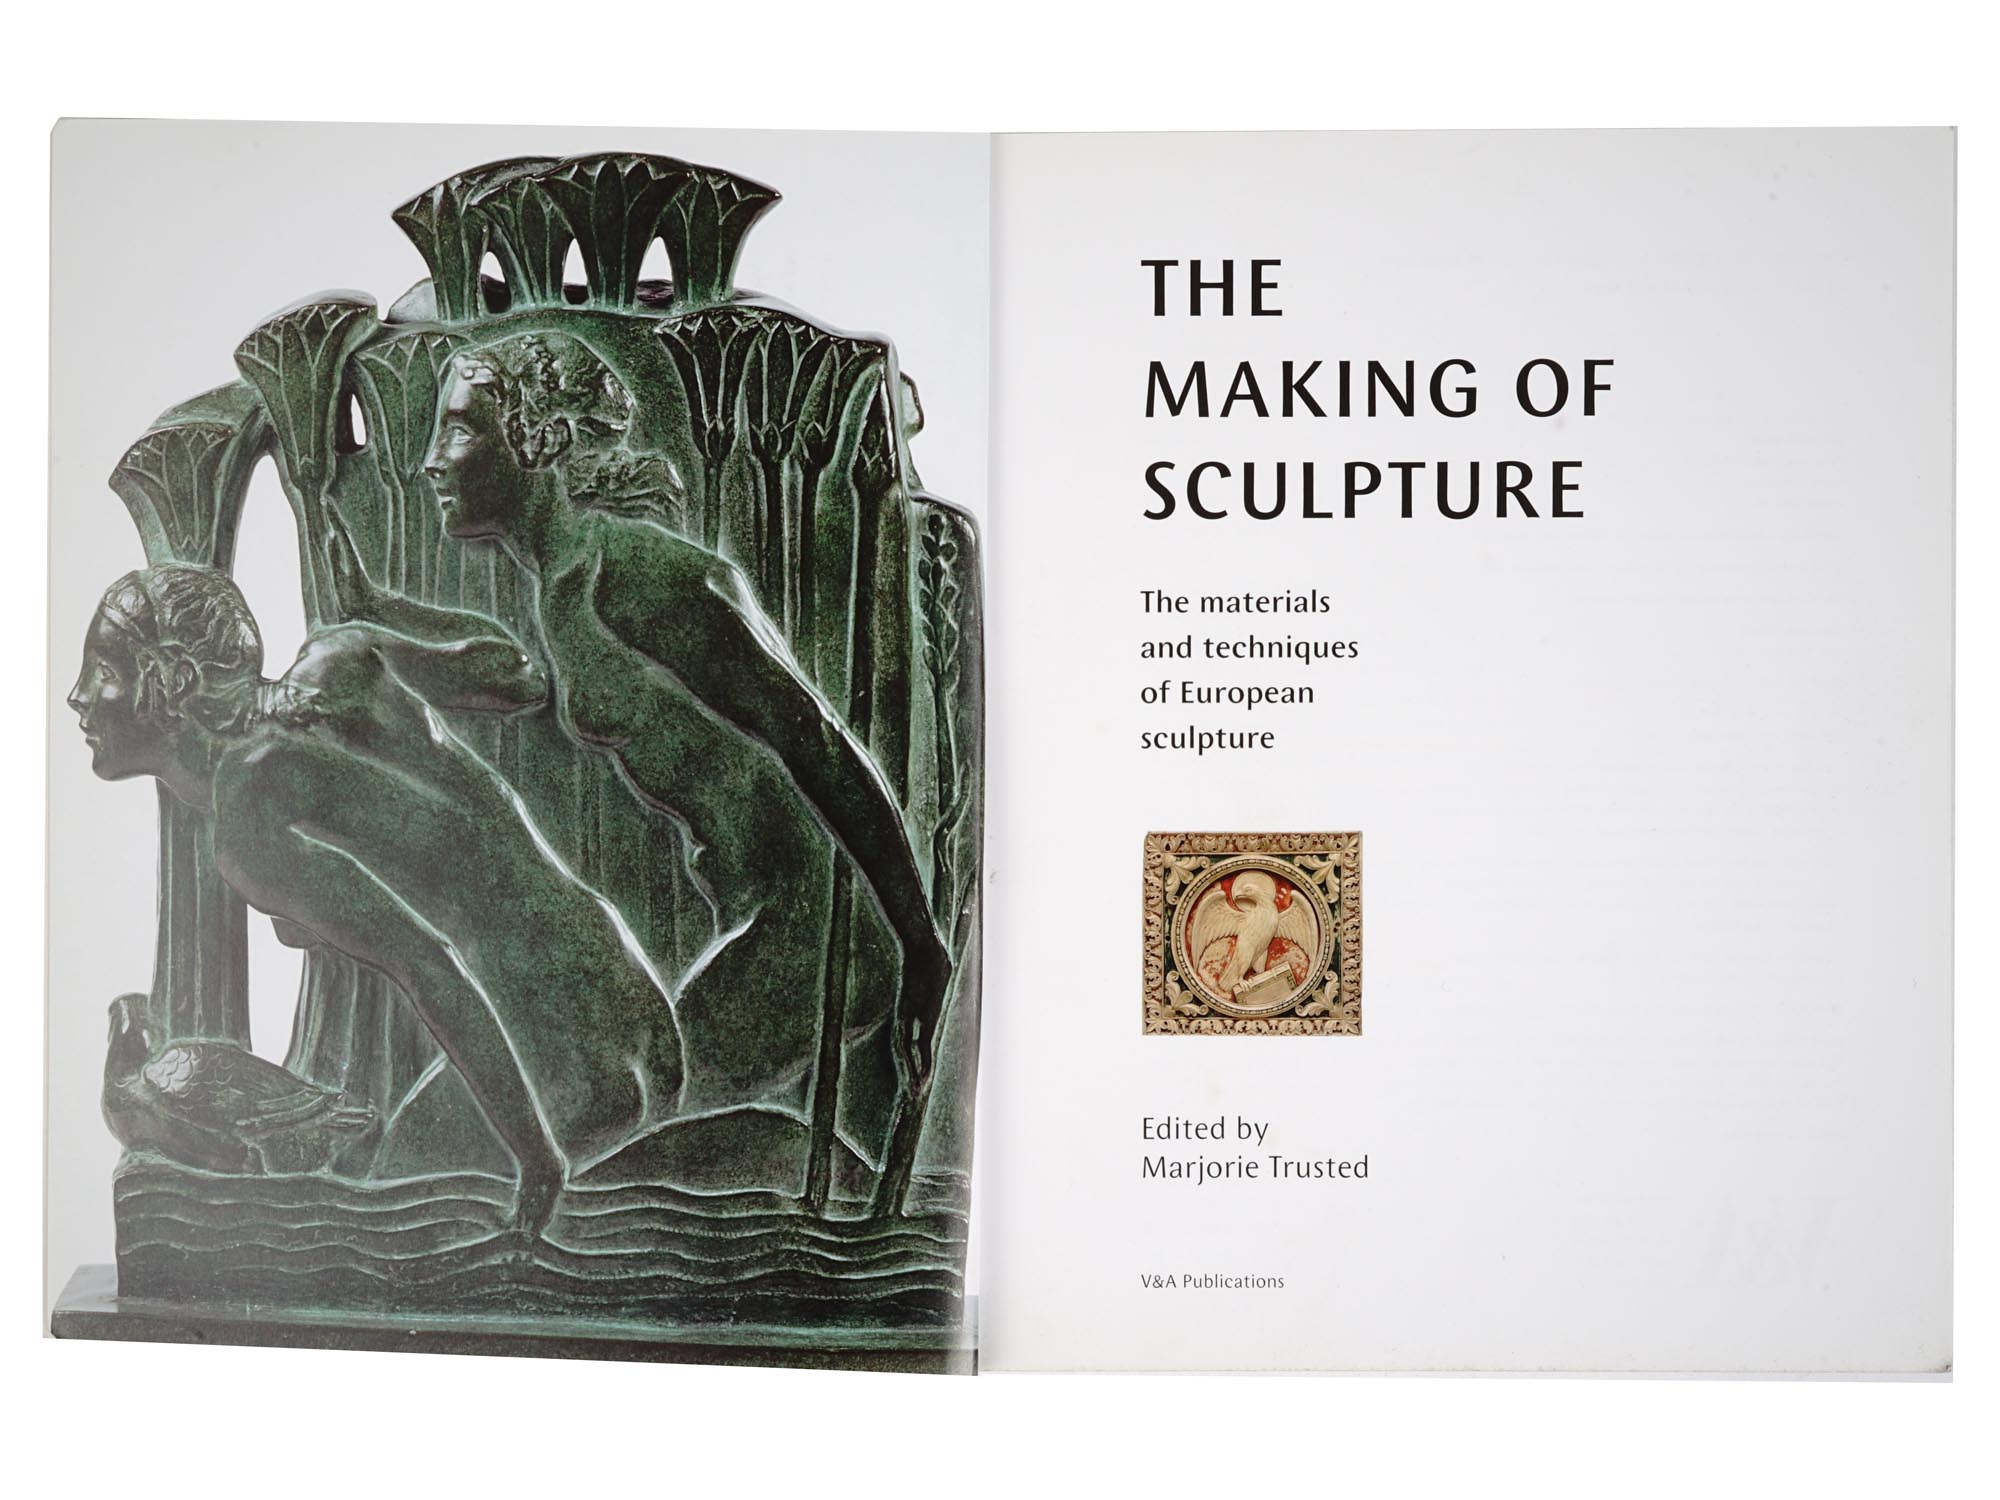 EUROPEAN SCULPTURE BOOKS AND COLLECTION CATALOGS PIC-6